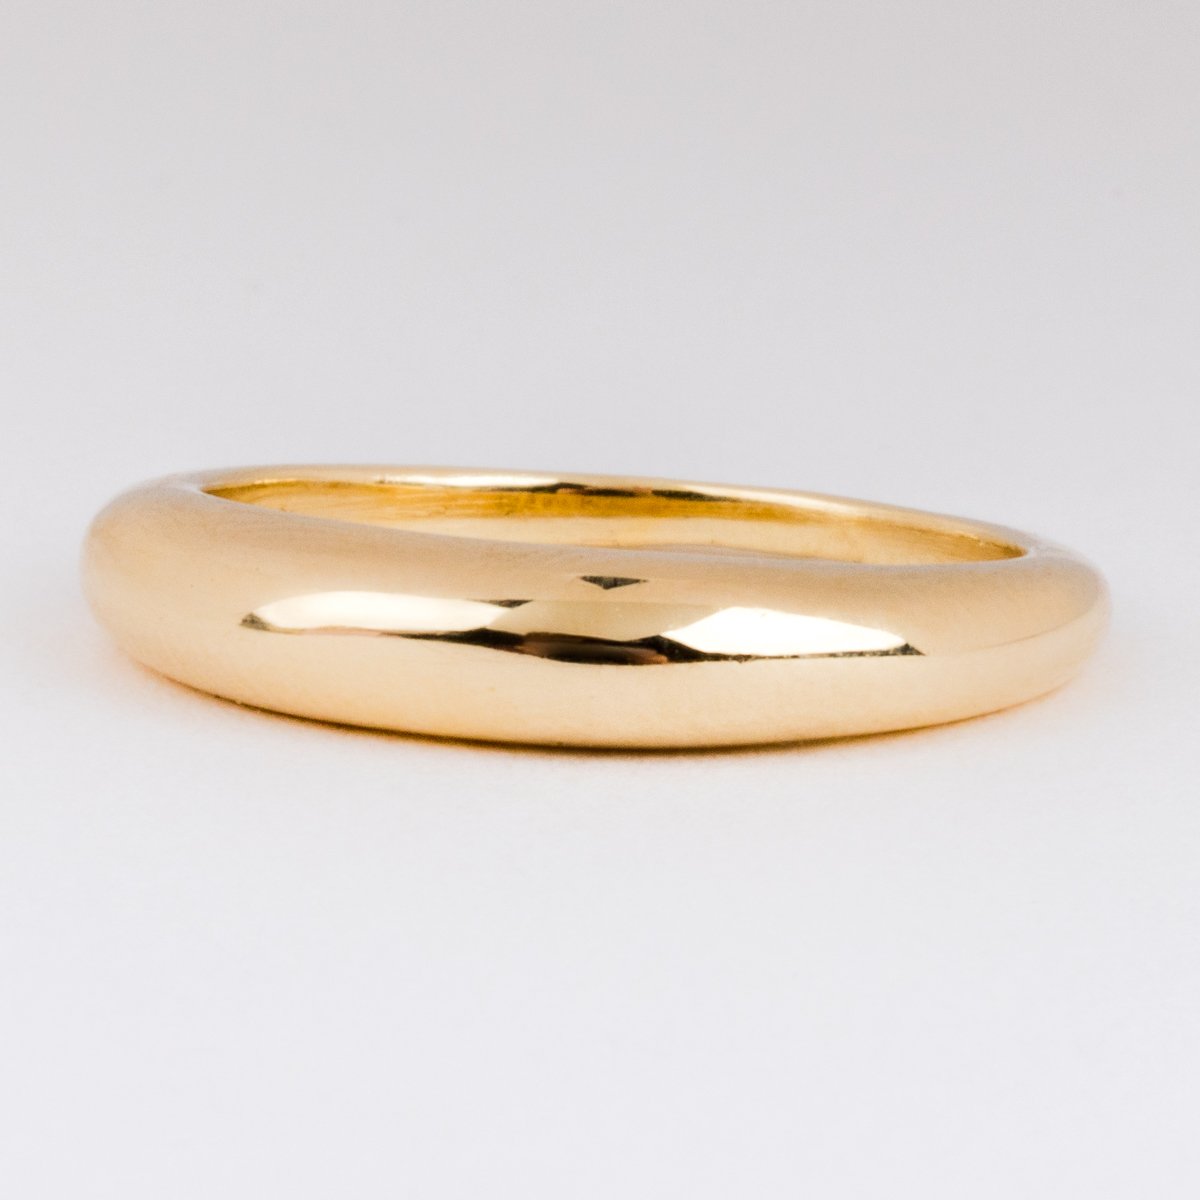 Pinky Promise Ring in Gold - rings - I Like it Here Club local eclectic